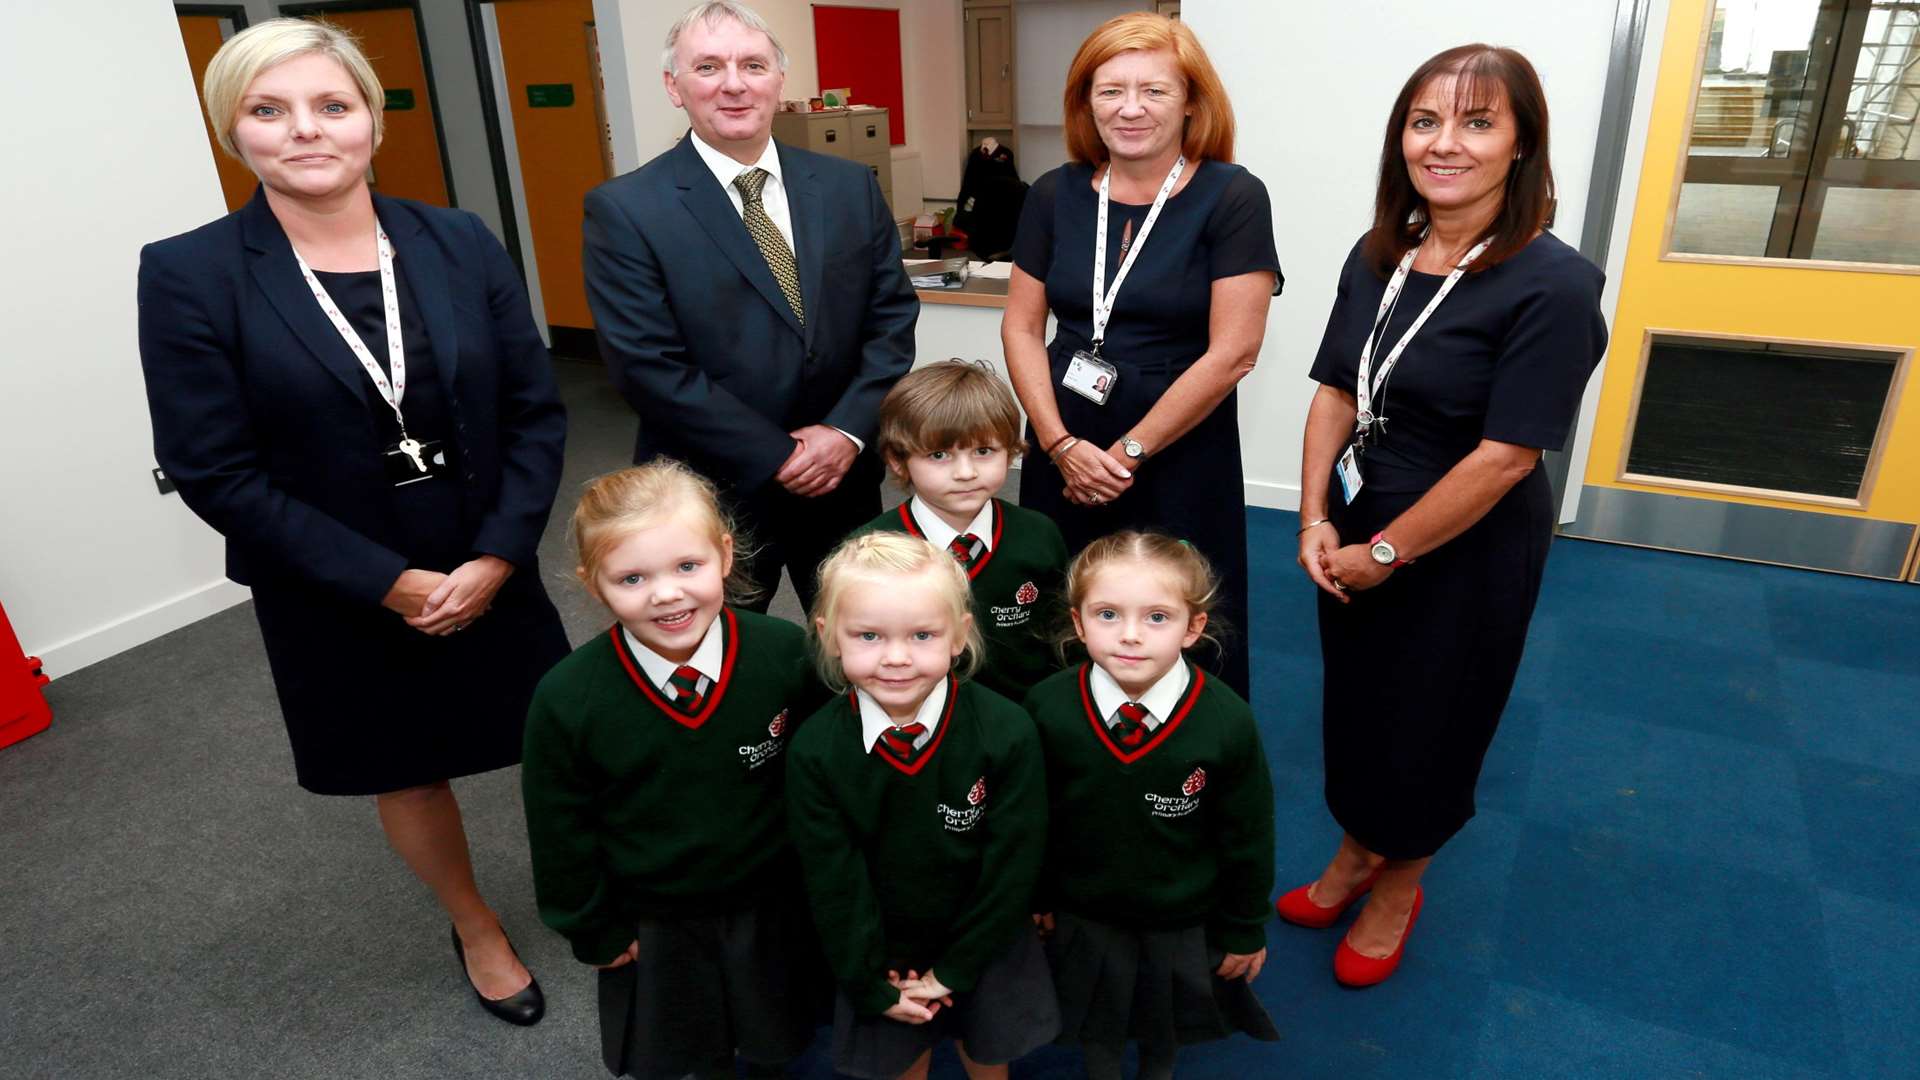 Principal Julie Forsythe, deputy CEO Neil Willis, business manager Jo Allen and office manager Claire Bond with Cherry Orchard pupils Sophie Whelan, Dolly-Mae De Ste Croix, Teddy Young and Daisy Russell. Picture: Phil Lee